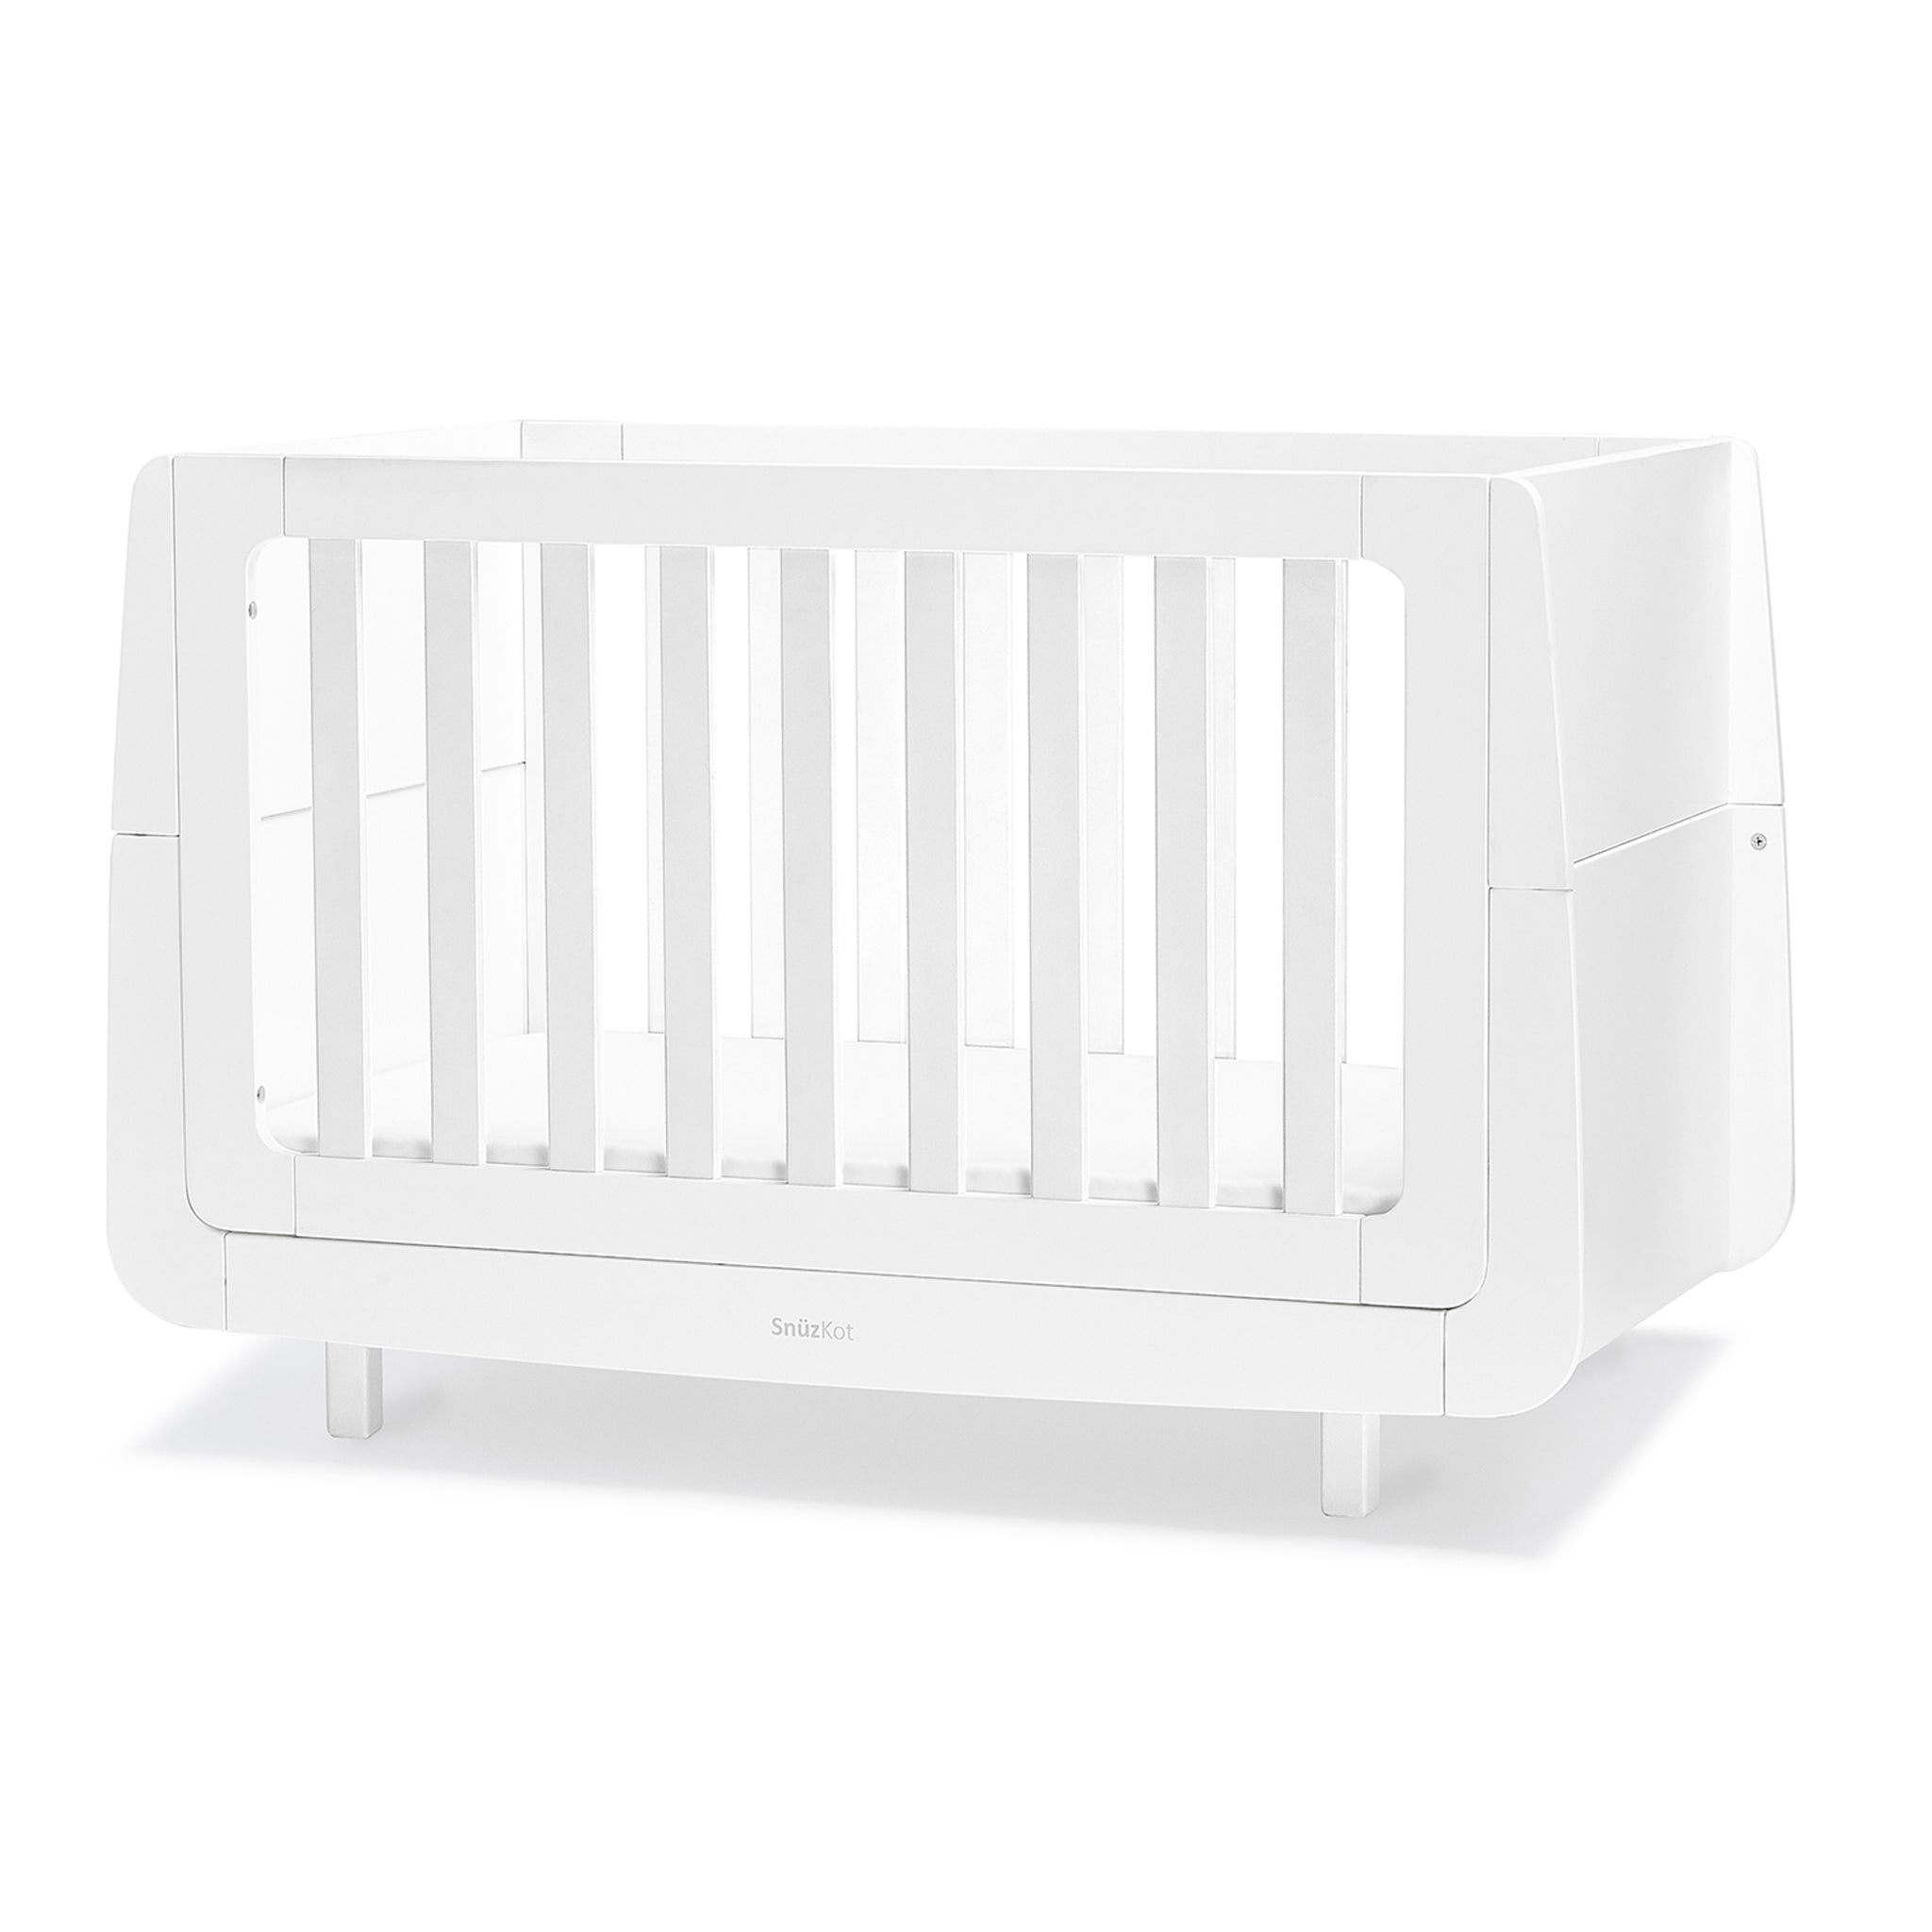 SnüzKot Mode Cot Bed in White Cot Beds FN005MA 5060157946168